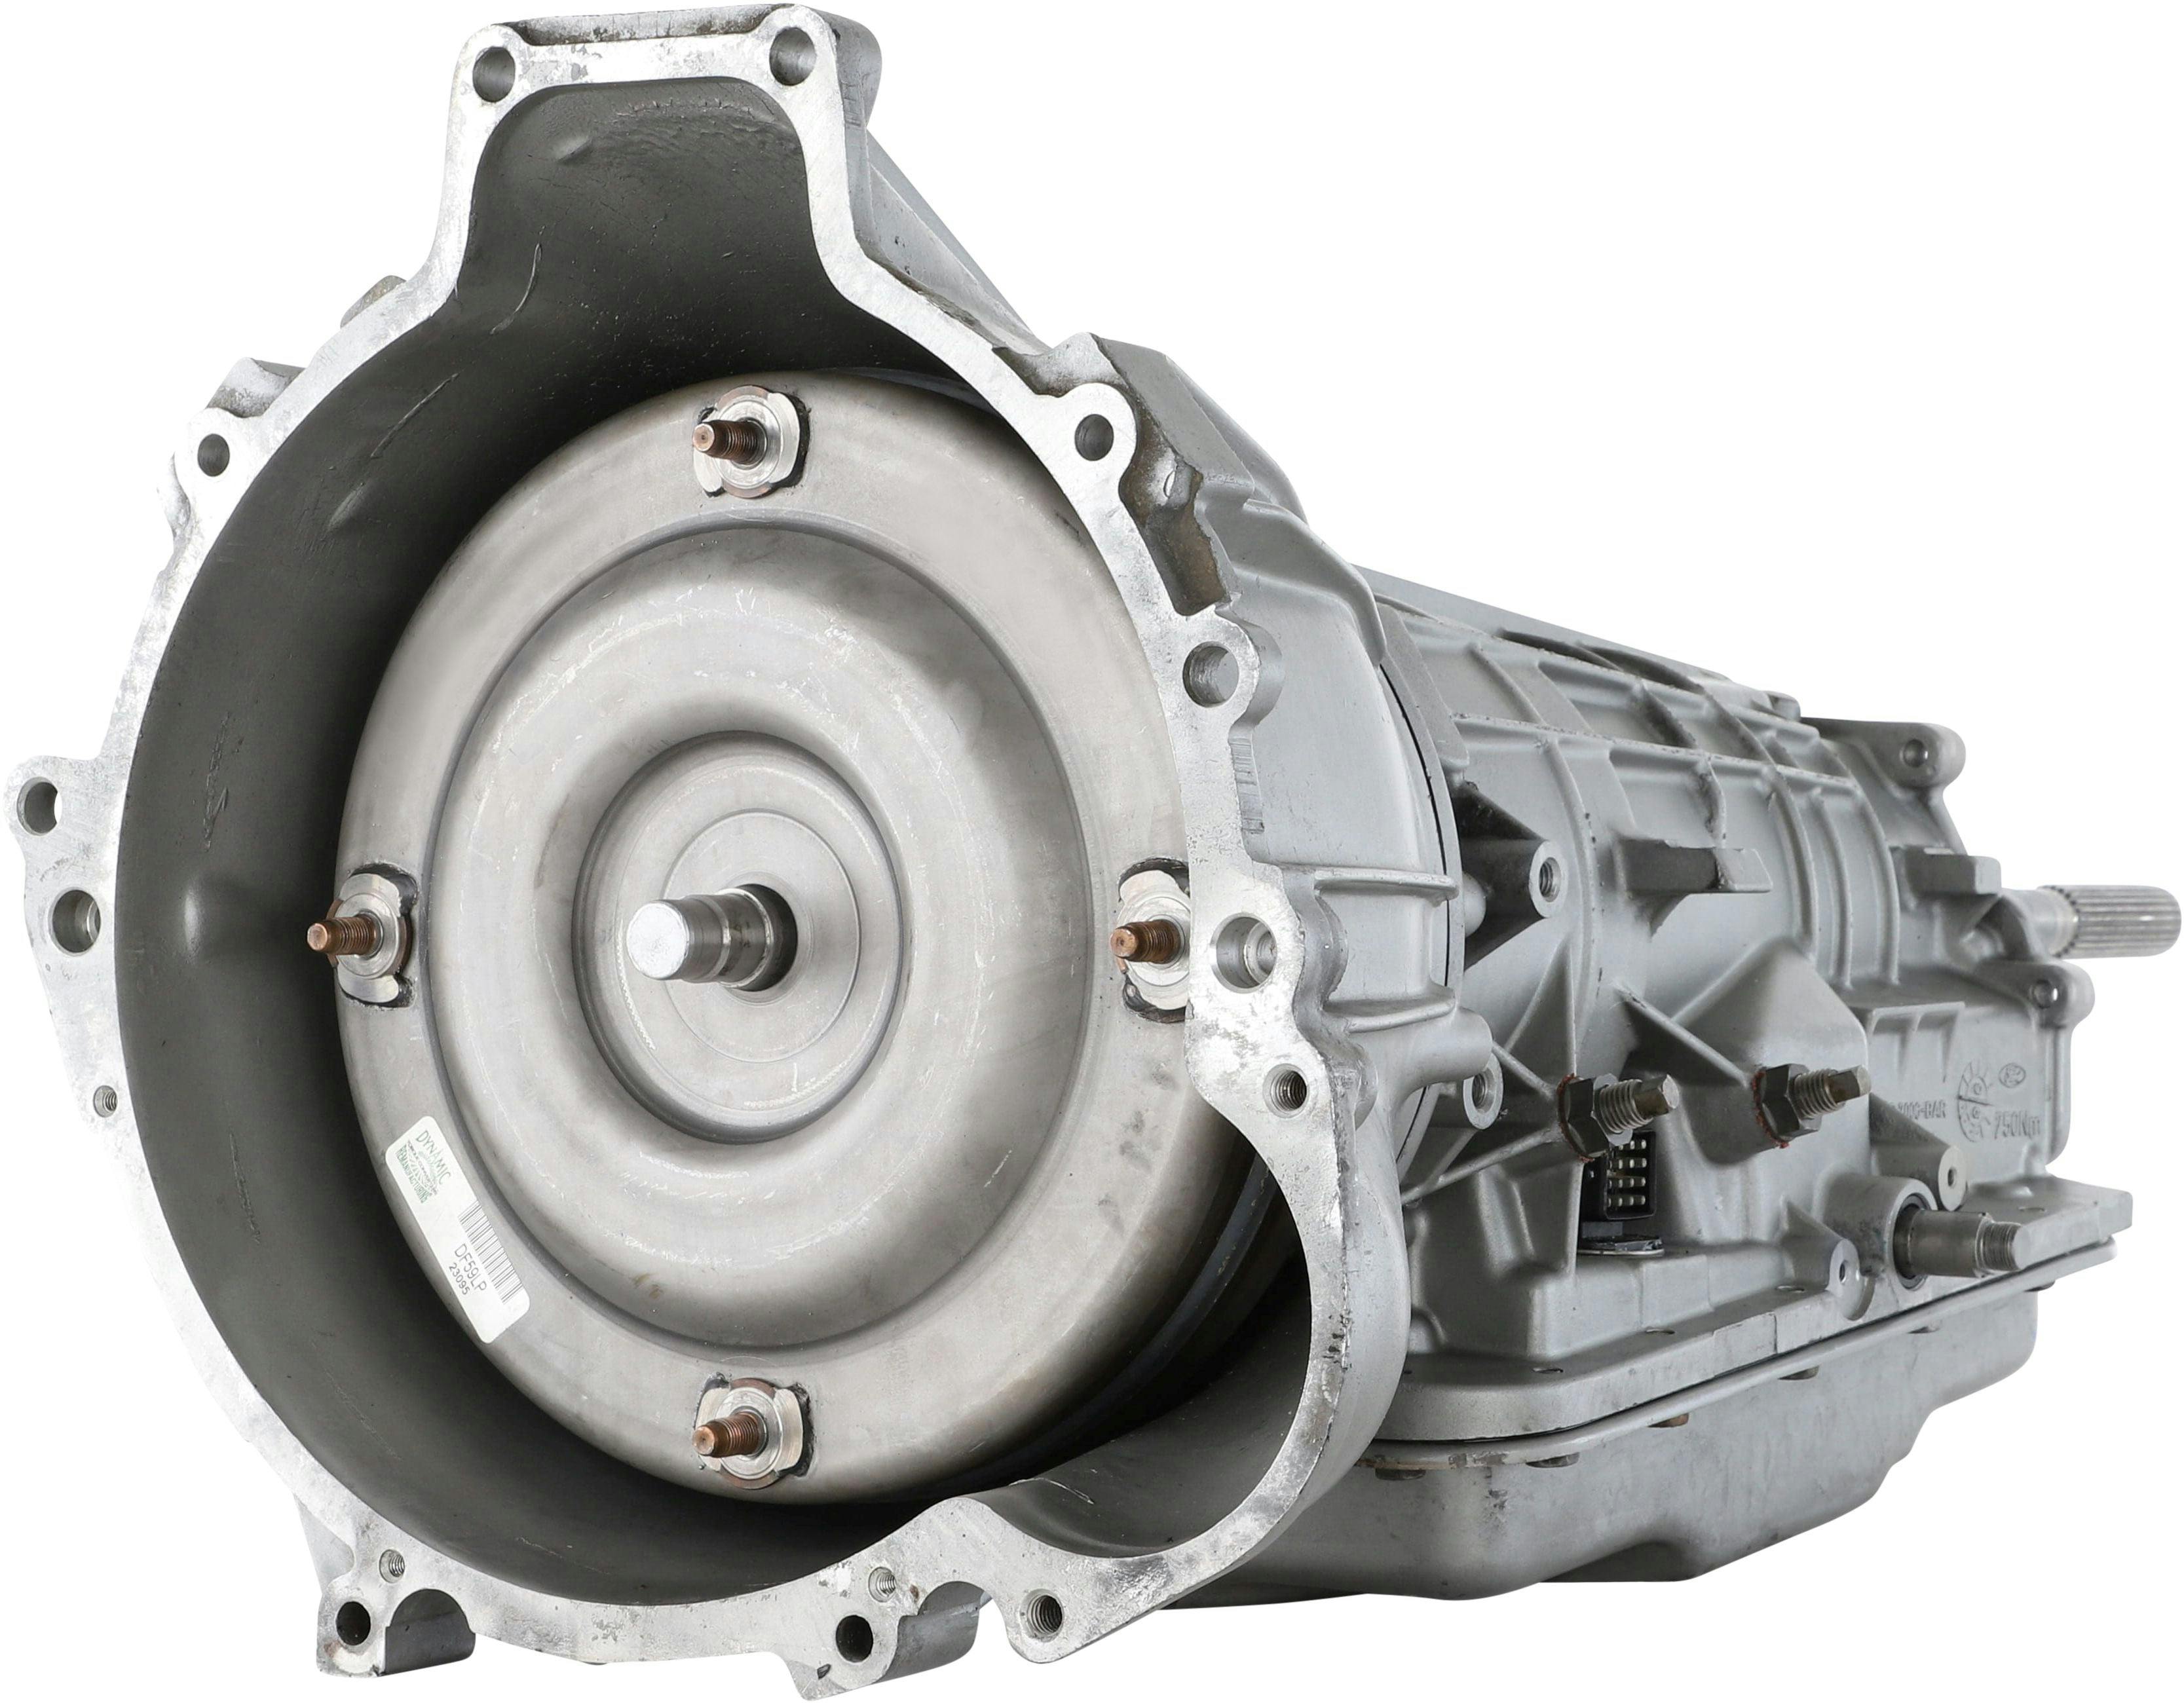 Automatic Transmission for 1995-1996 Ford Aerostar/Explorer/Ranger and Mazda B4000 RWD with 4L V6 Engine